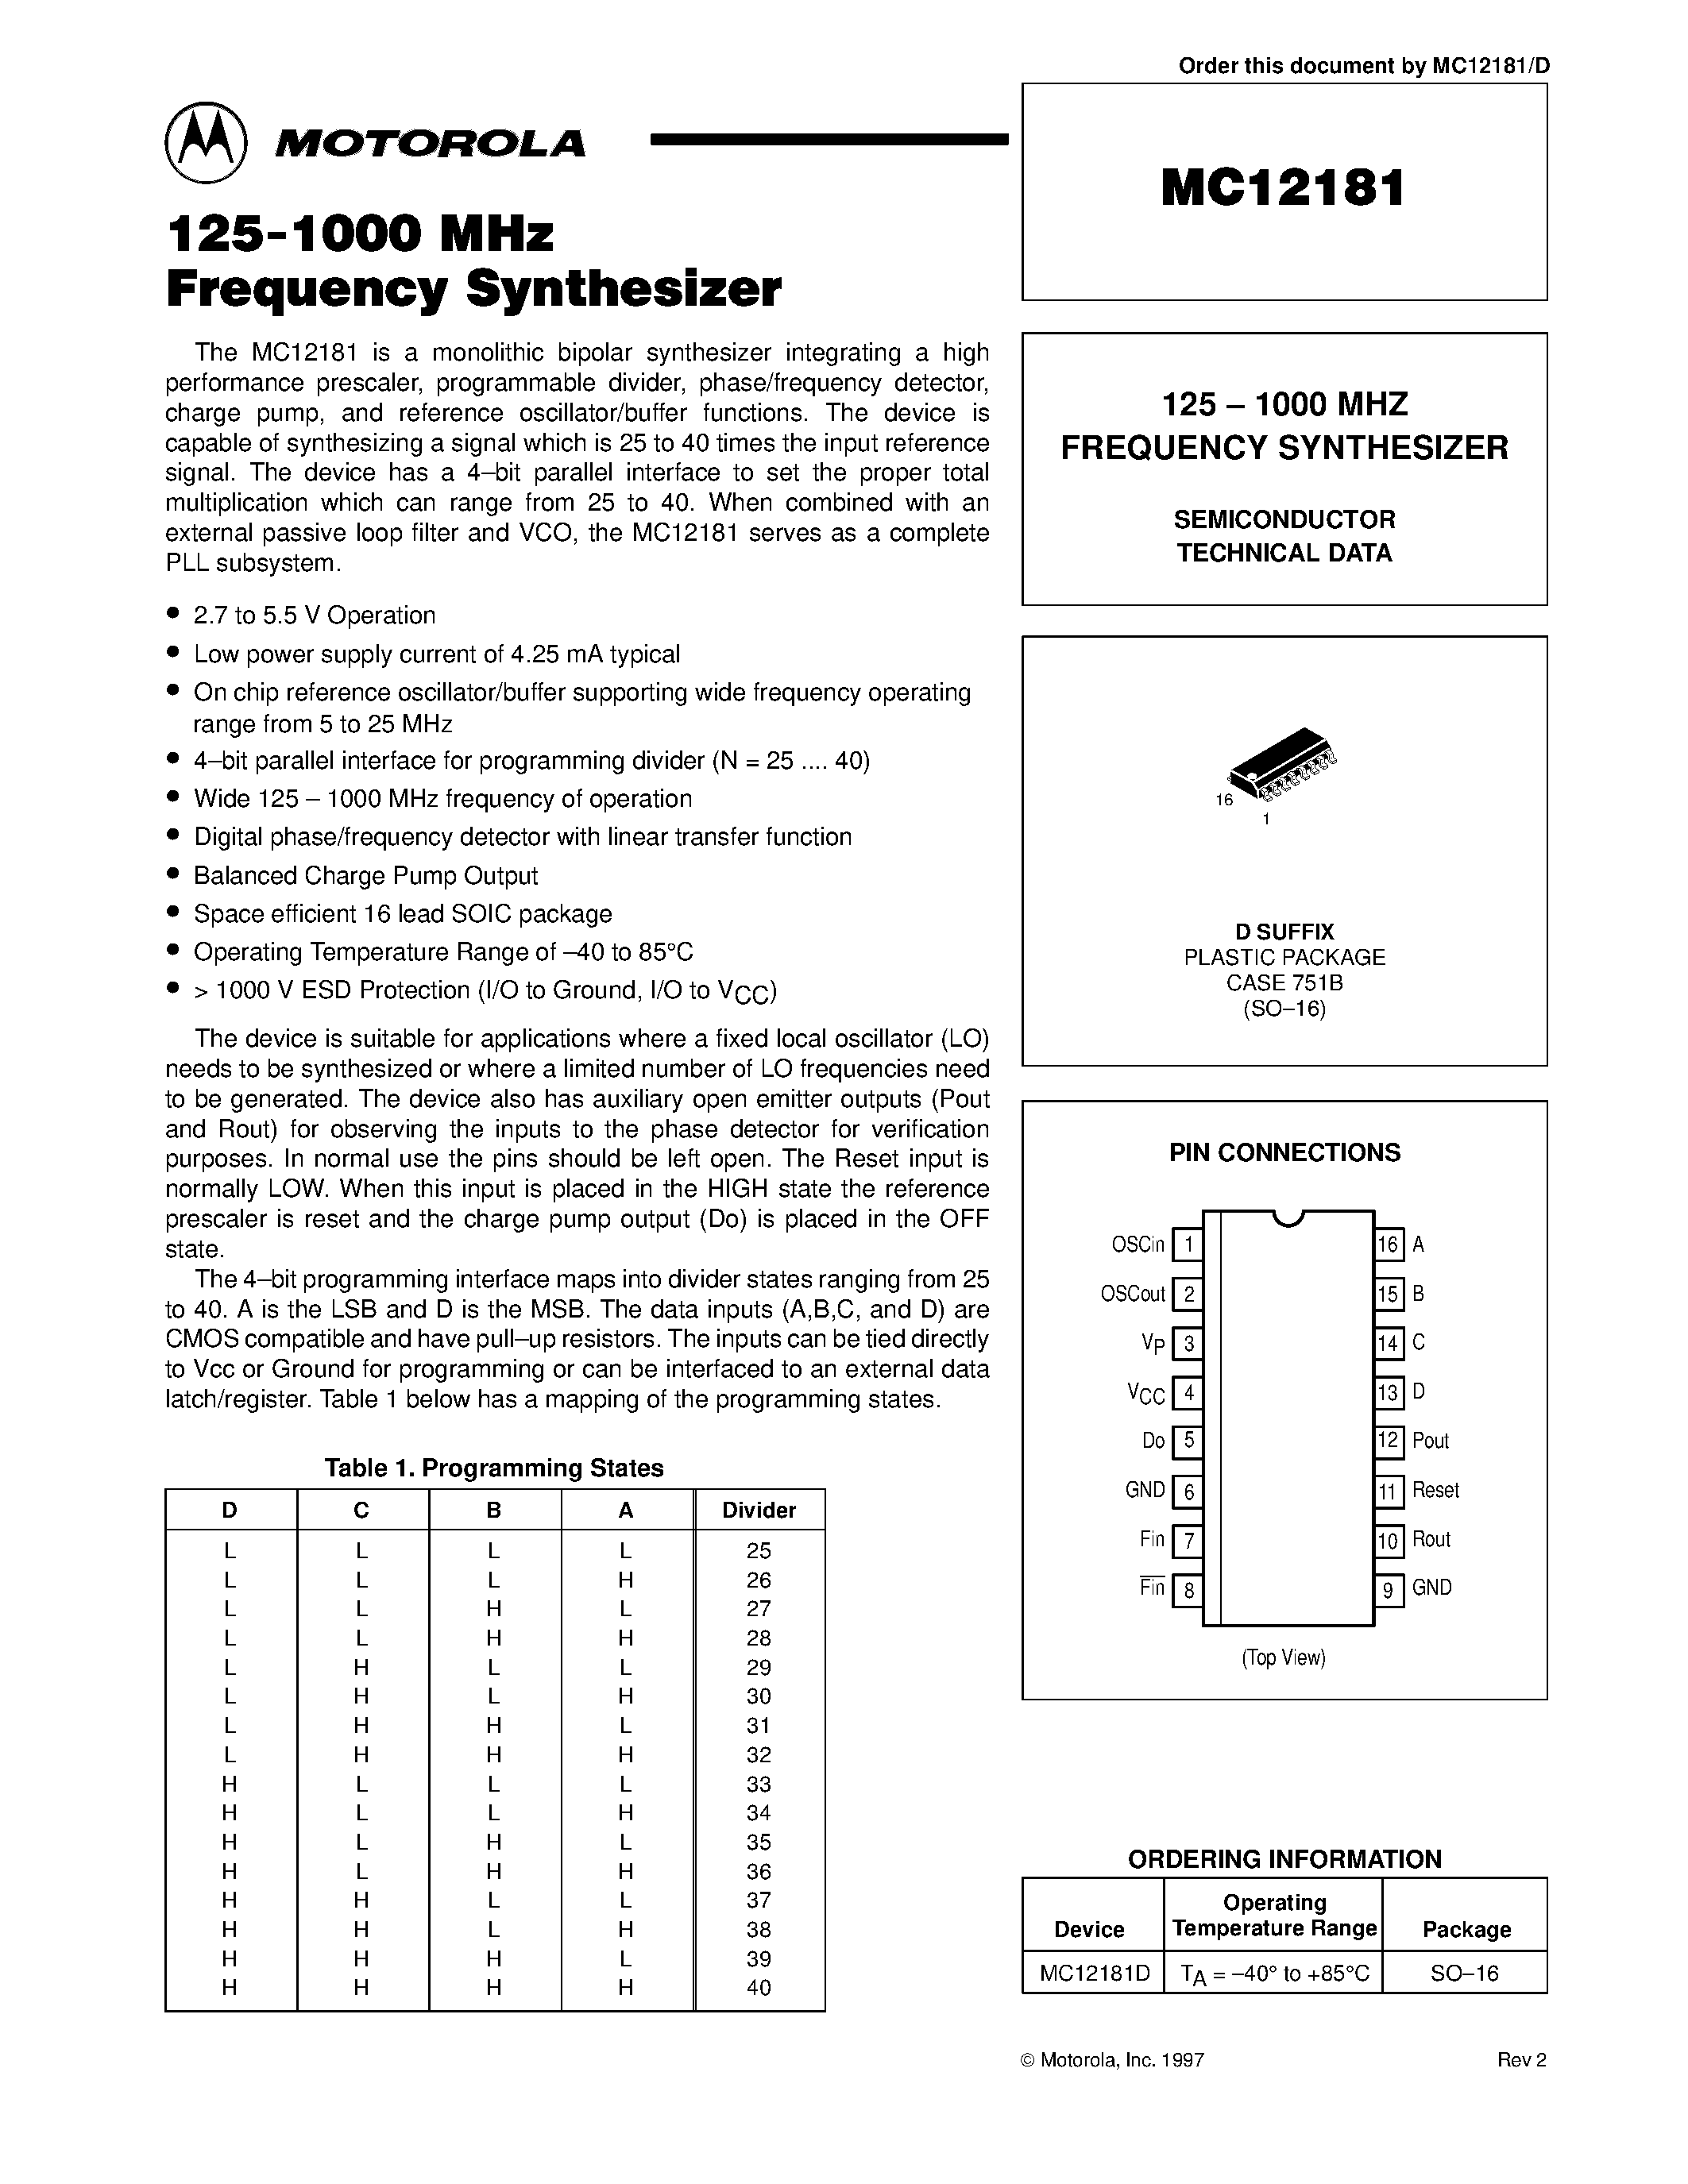 Datasheet MC12181D - 125 - 1000 MHZ FREQUENCY SYNTHESIZER page 1